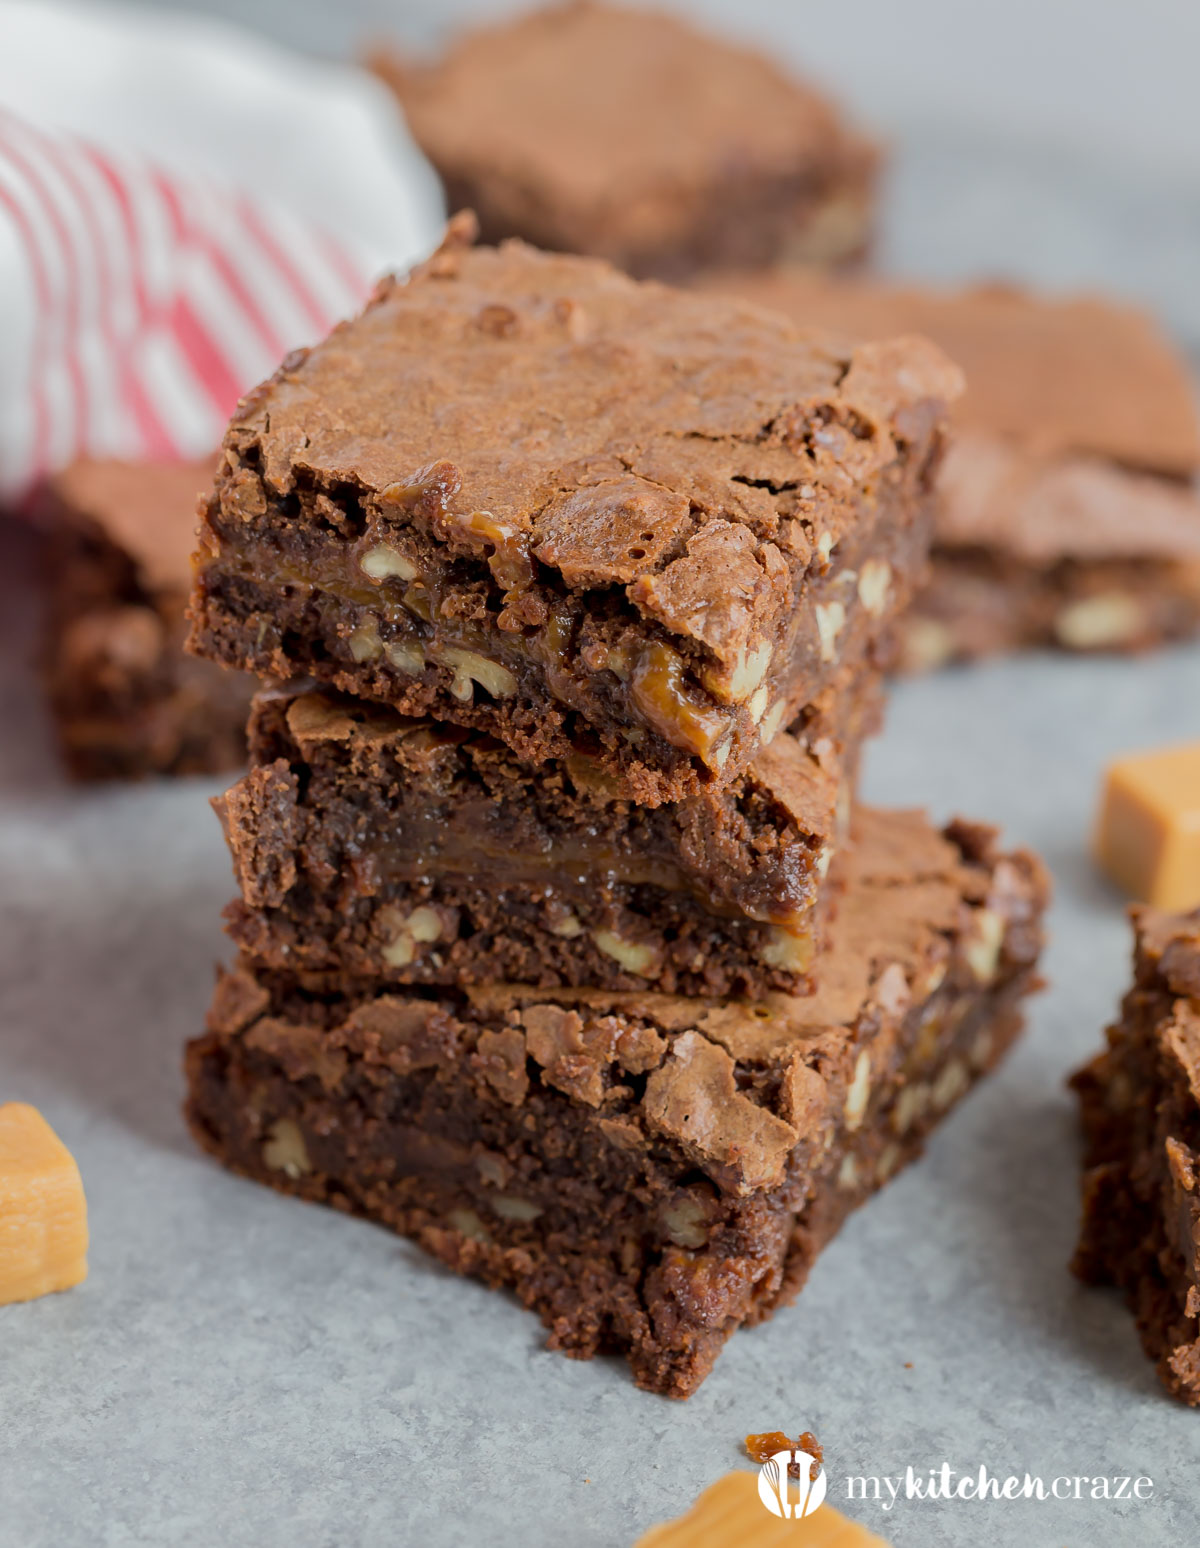 Caramel Pecan Brownies are soft, chewy, chocolate-y with caramel and pecans. These take regular brownies to the next level!